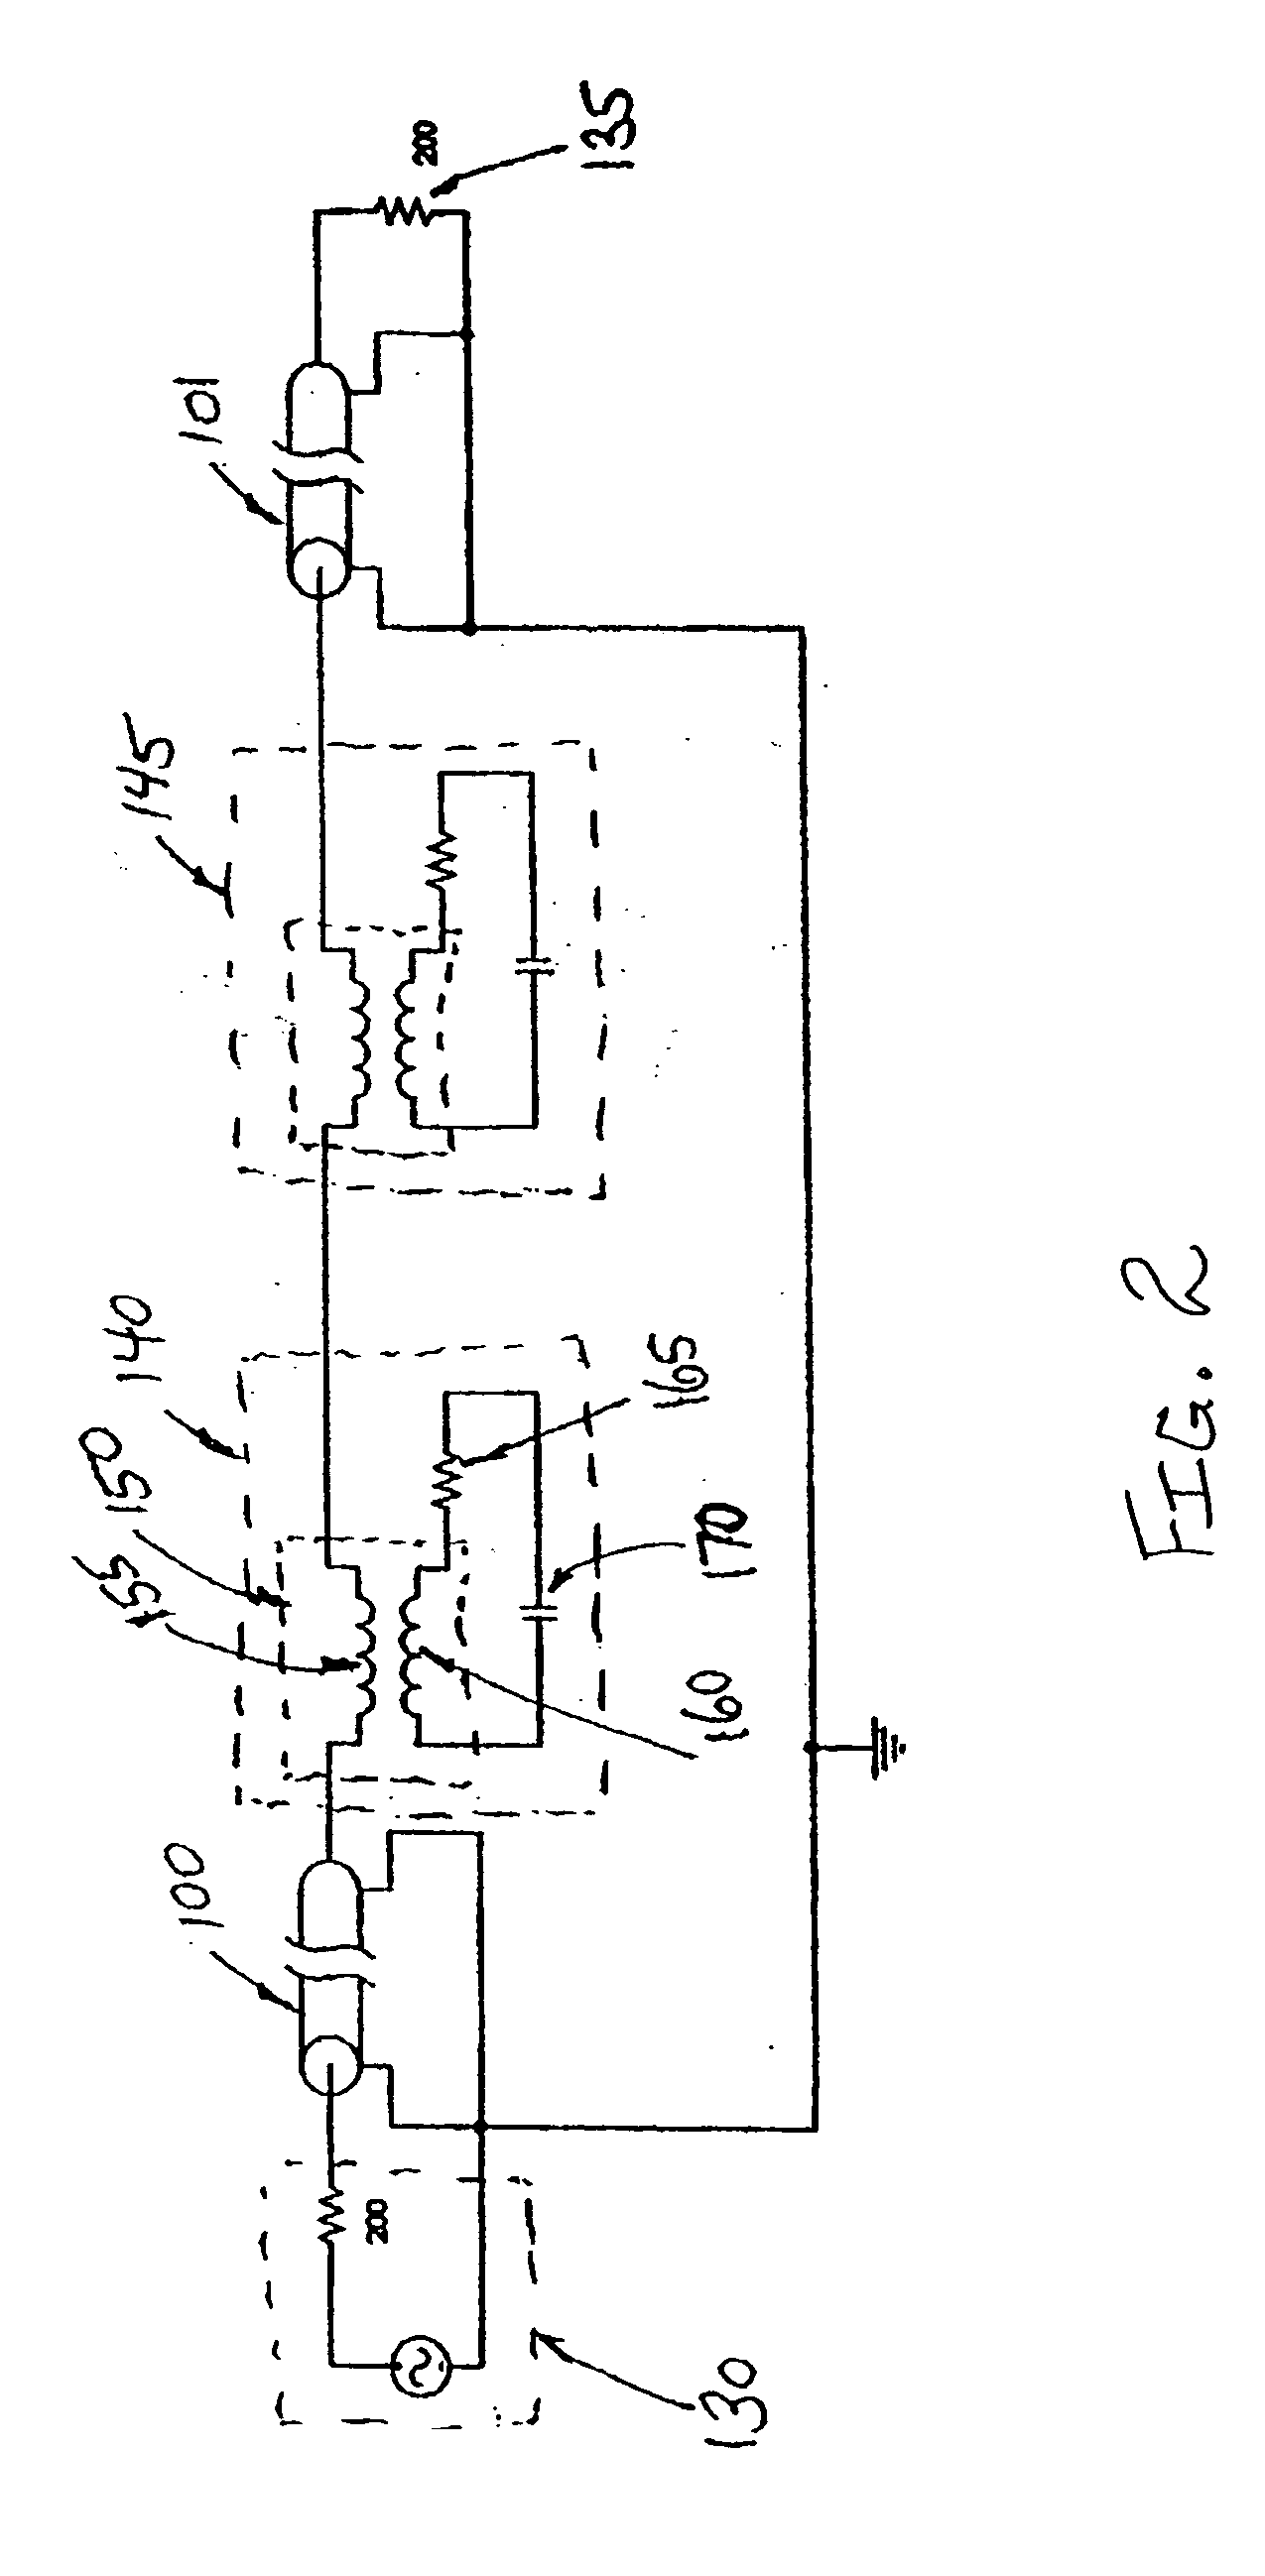 Filter for segmenting power lines for communications